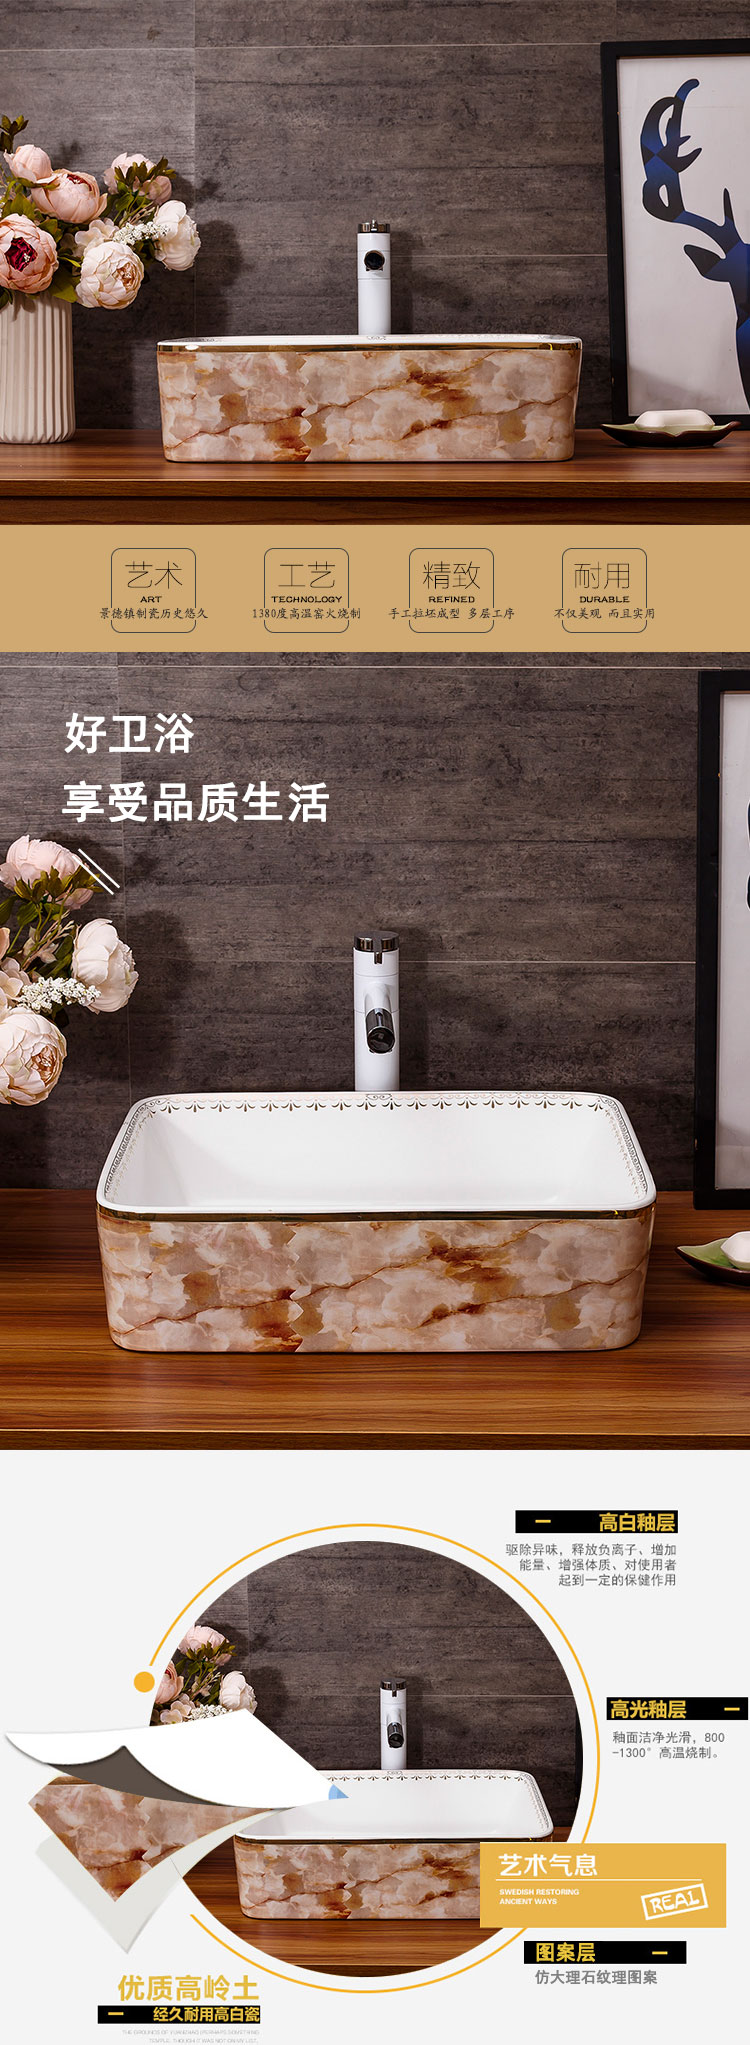 On the ceramic bowl, square, European art basin sink basin bathroom sinks counters are contracted household